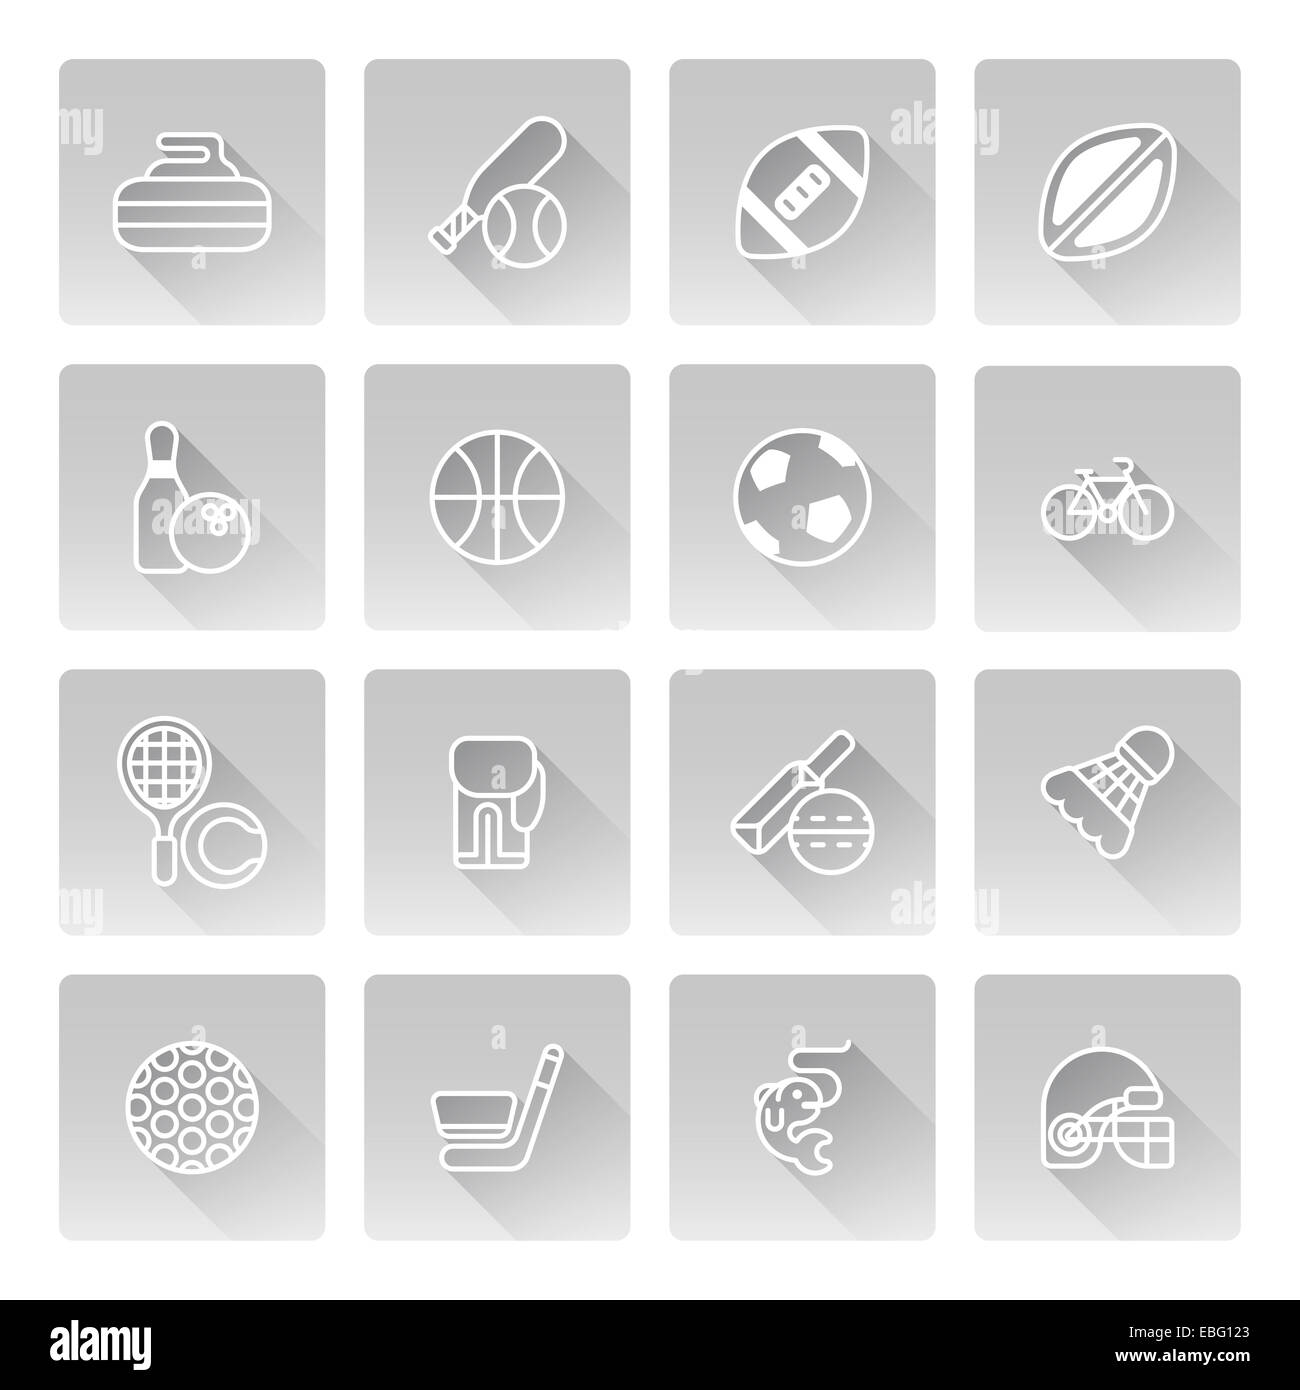 Sports icons set with icons for many sports including baseball, basketball, curling and many more Stock Photo